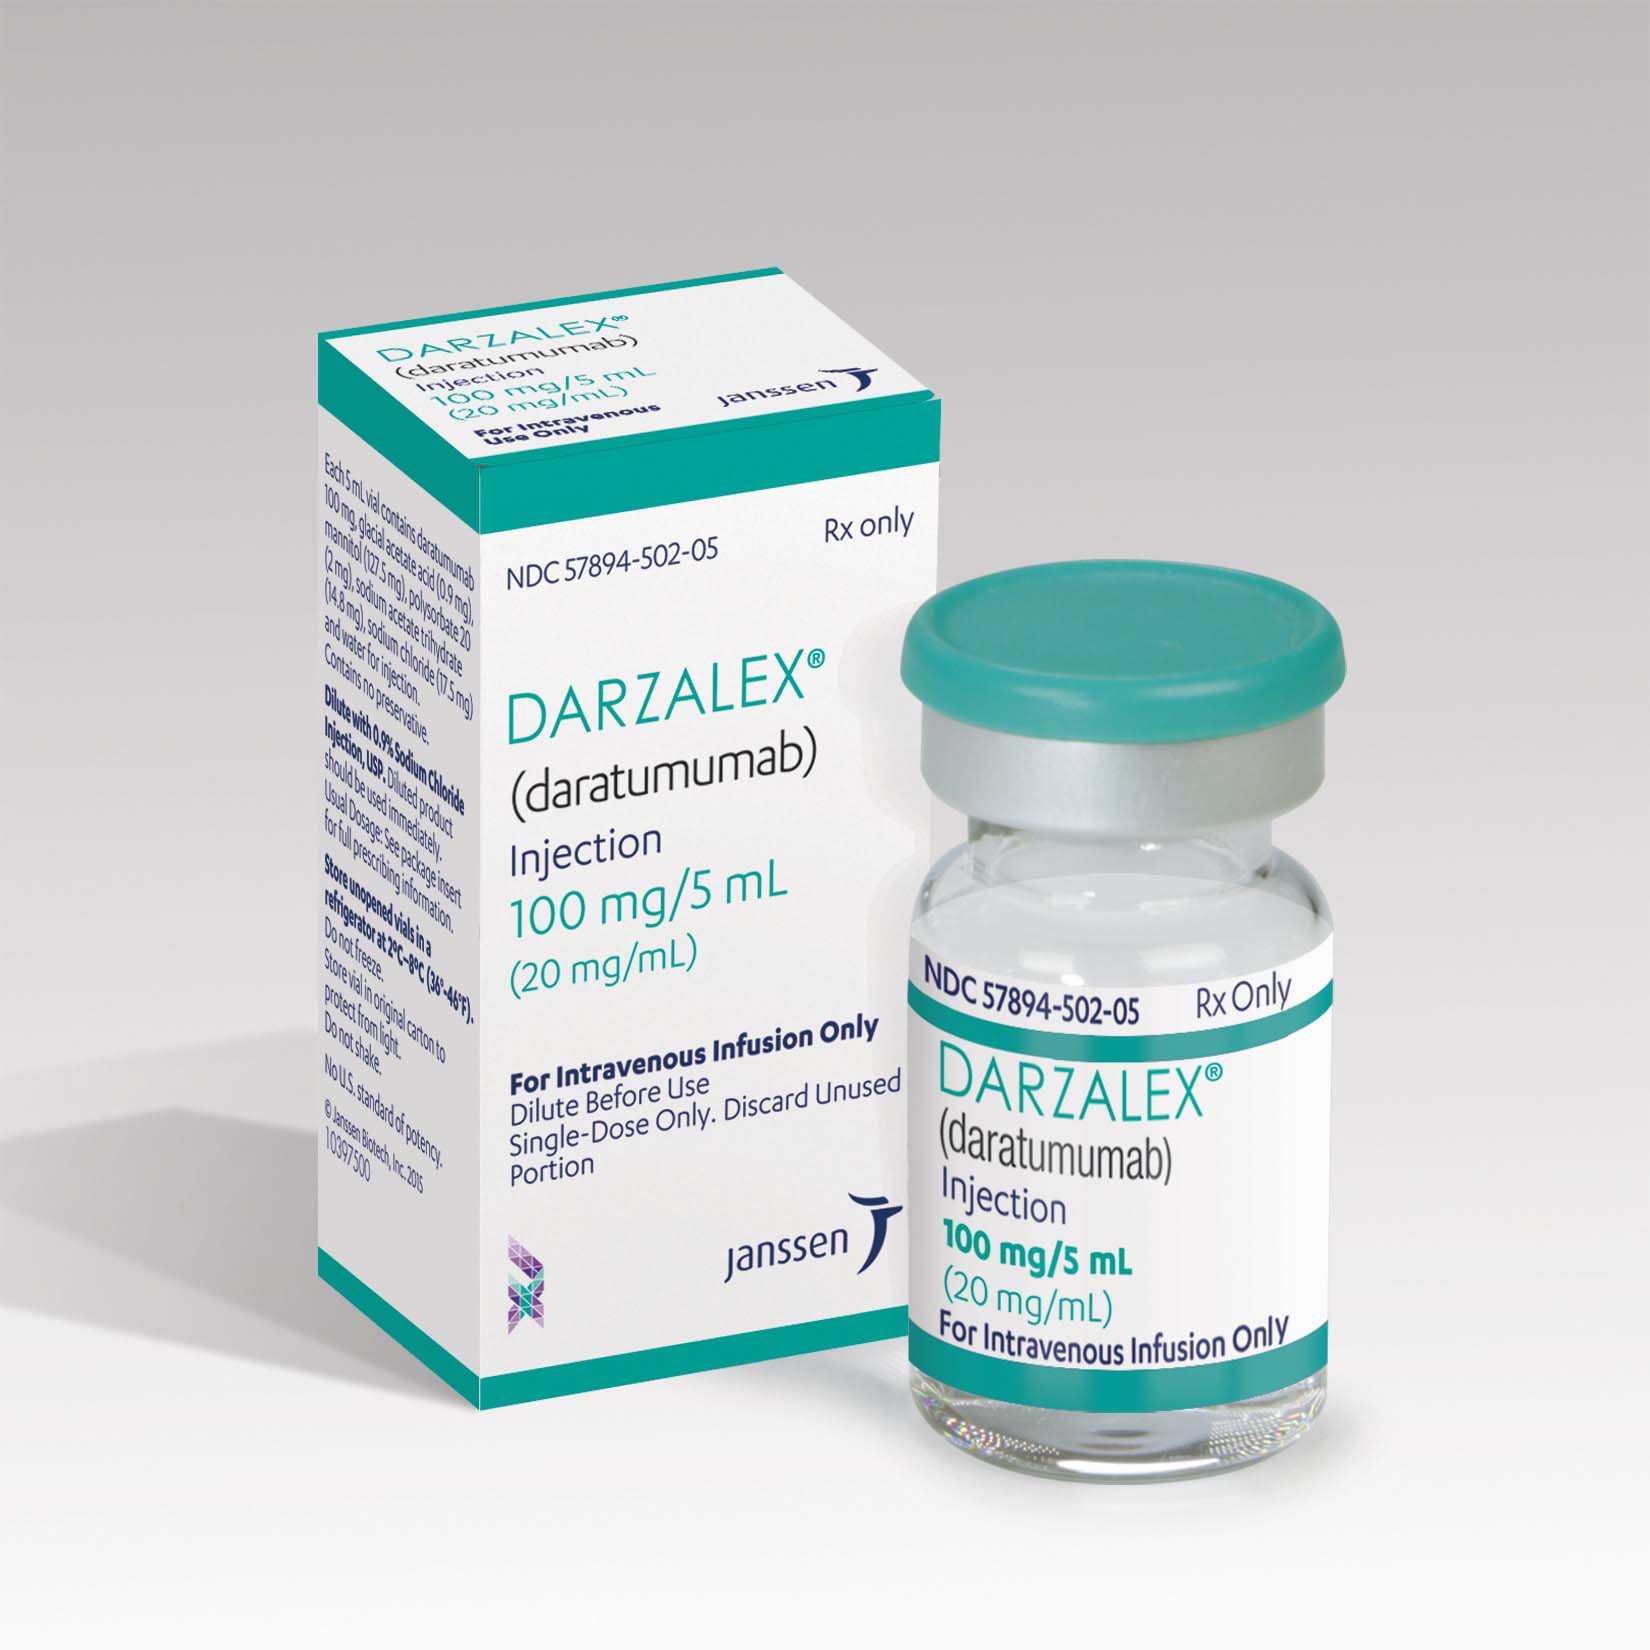 darzalex-daratumumab-approved-by-u-s-fda-in-combination-with-two